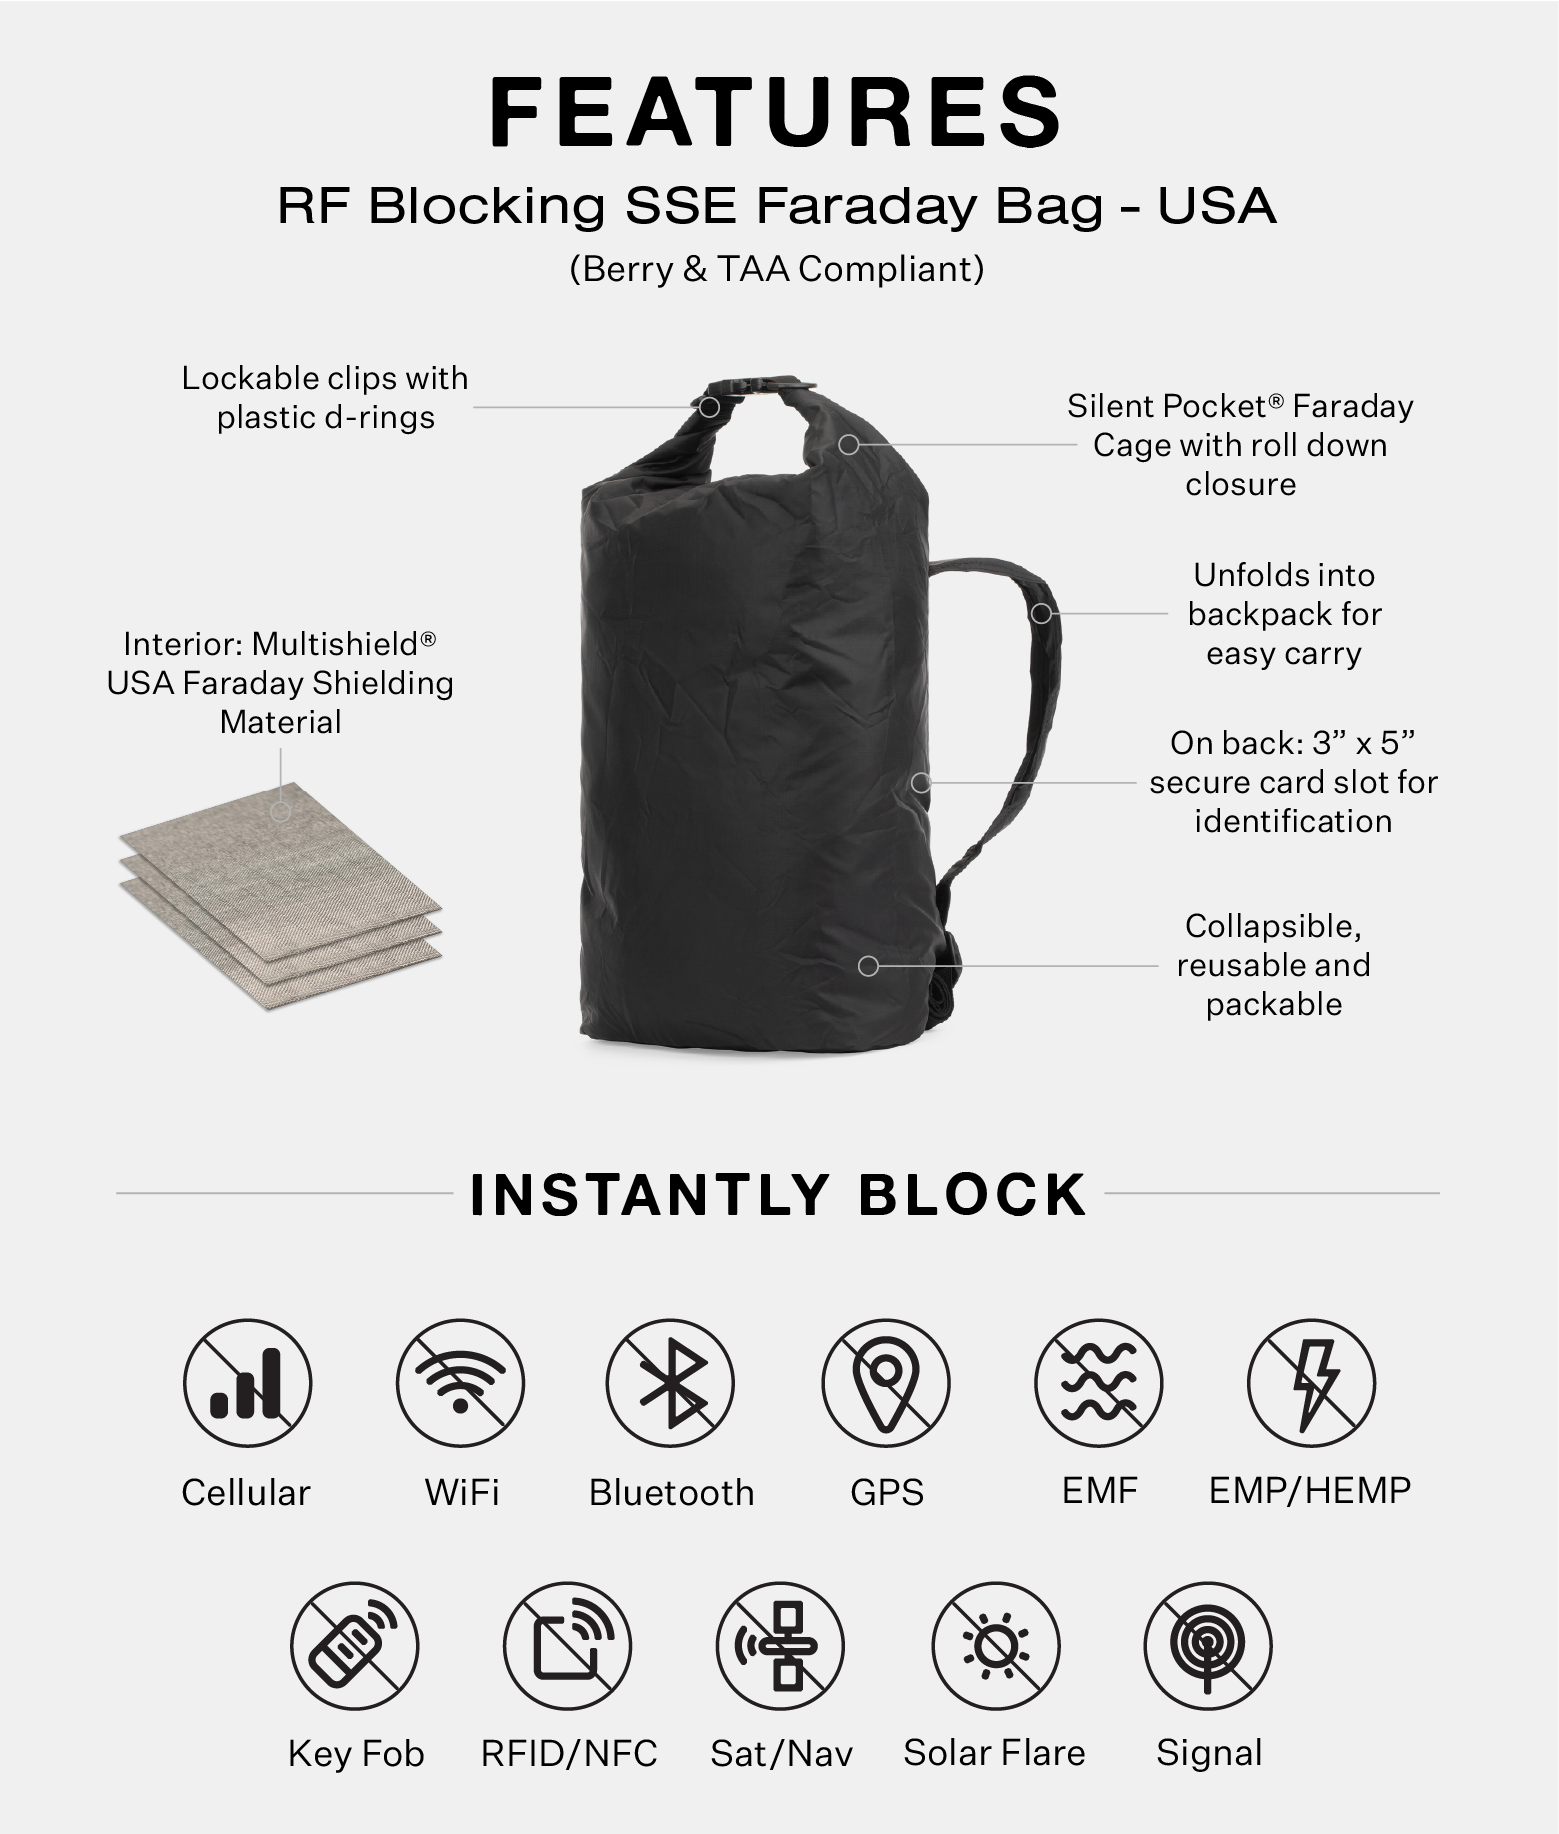 Introducing the Faraday Pouch